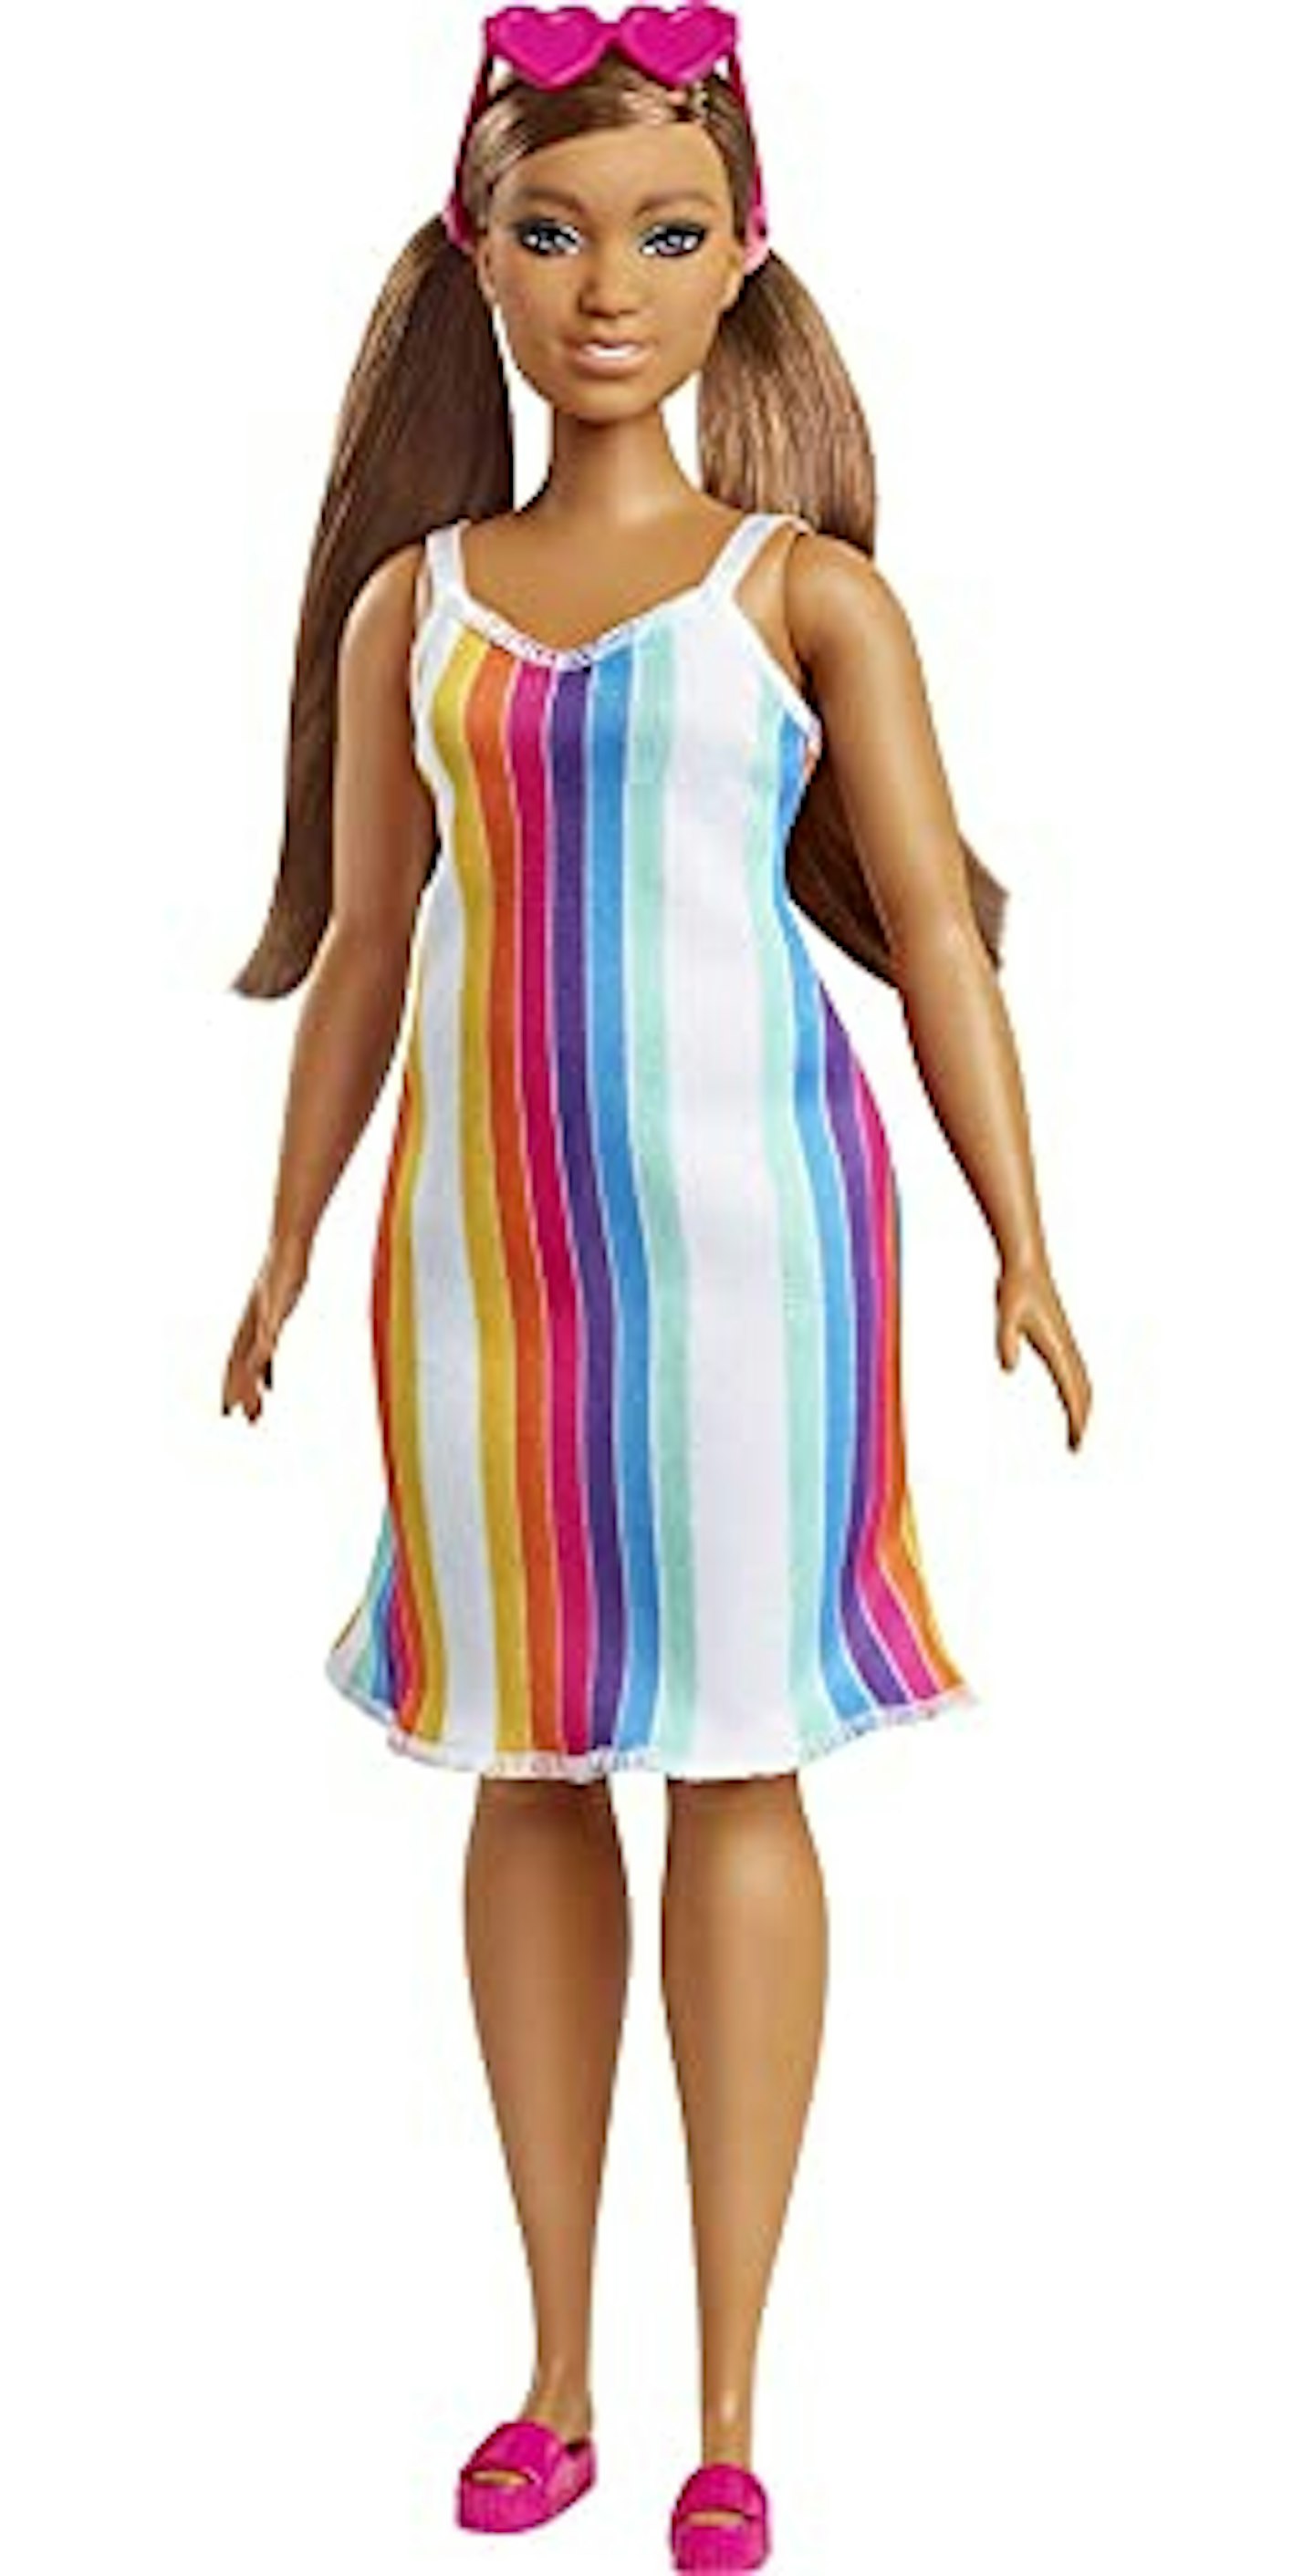 Barbie Loves the Ocean Doll with Rainbow Striped Dress